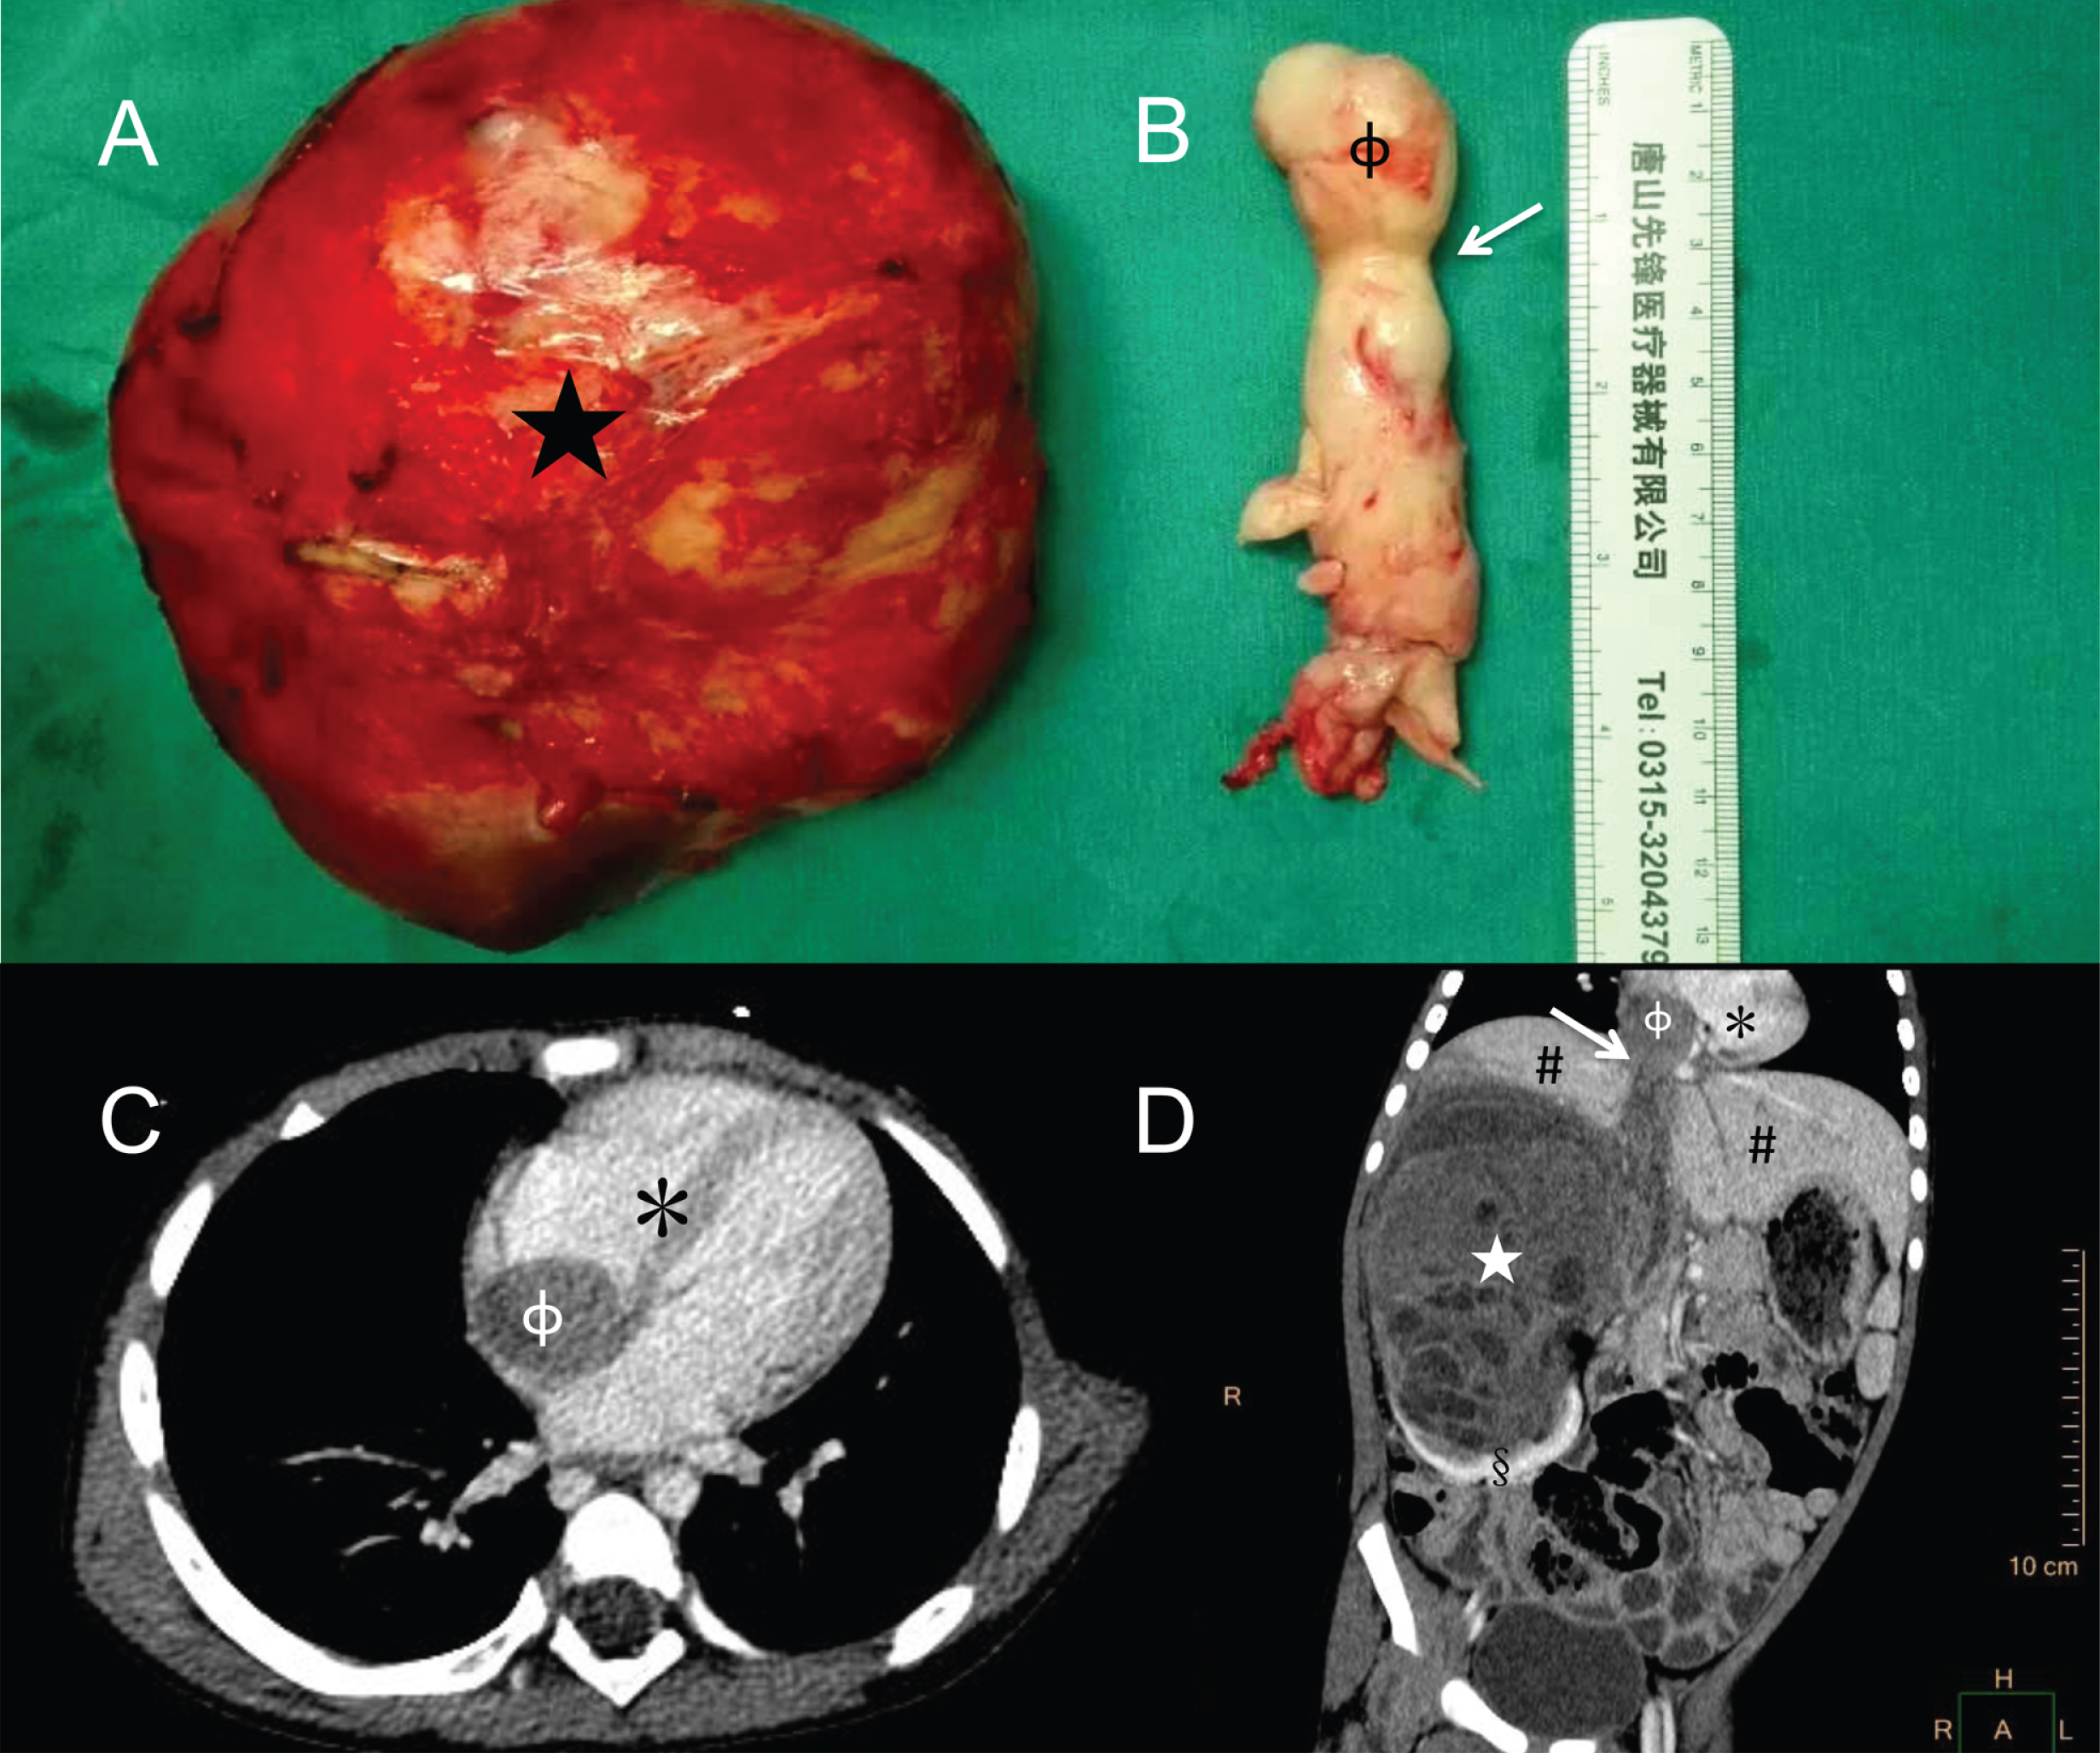 Surgical samples and CT images of Wilm’s tumor, intravenous and right atrium embolus. Surgical samples of the renal mass in right kidney (A), and embolus from the right aterium (B). CT image of the renal mass and embolus: cross section (C) and coronal (D) (★: Wilm’s tumor in right kidney; Φ: embolus in right atrium; *: heart; #: liver; §: residual kidney; Arrow: press mark of diaphragm surround the embolus).